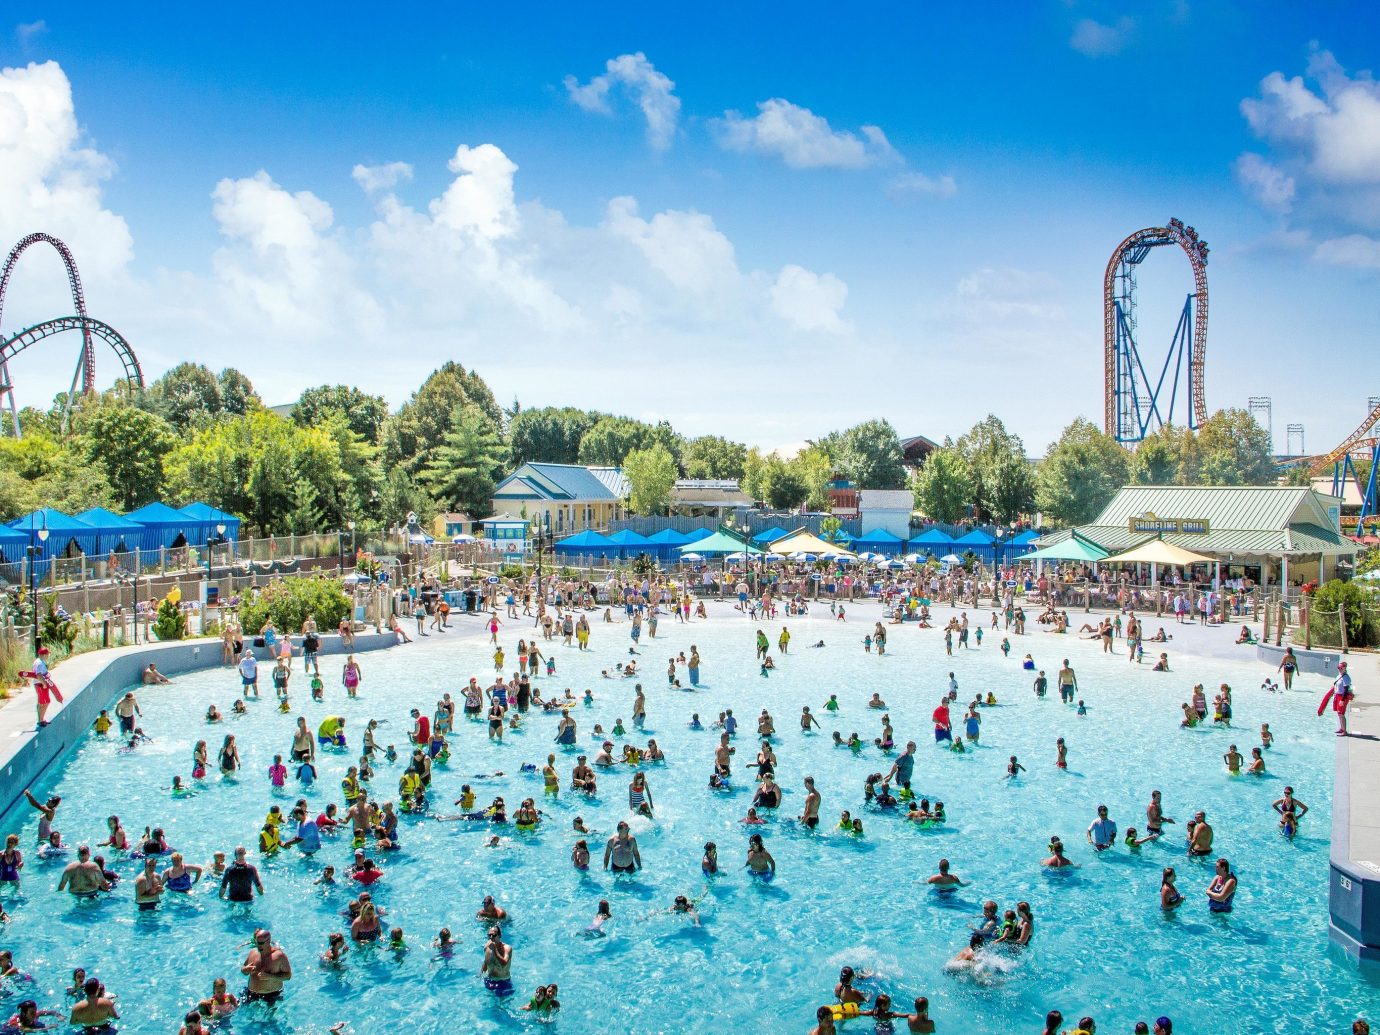 Trip Ideas Weekend Getaways sky outdoor amusement park Water park park leisure Resort people recreation nonbuilding structure outdoor recreation swimming pool swimming day crowd